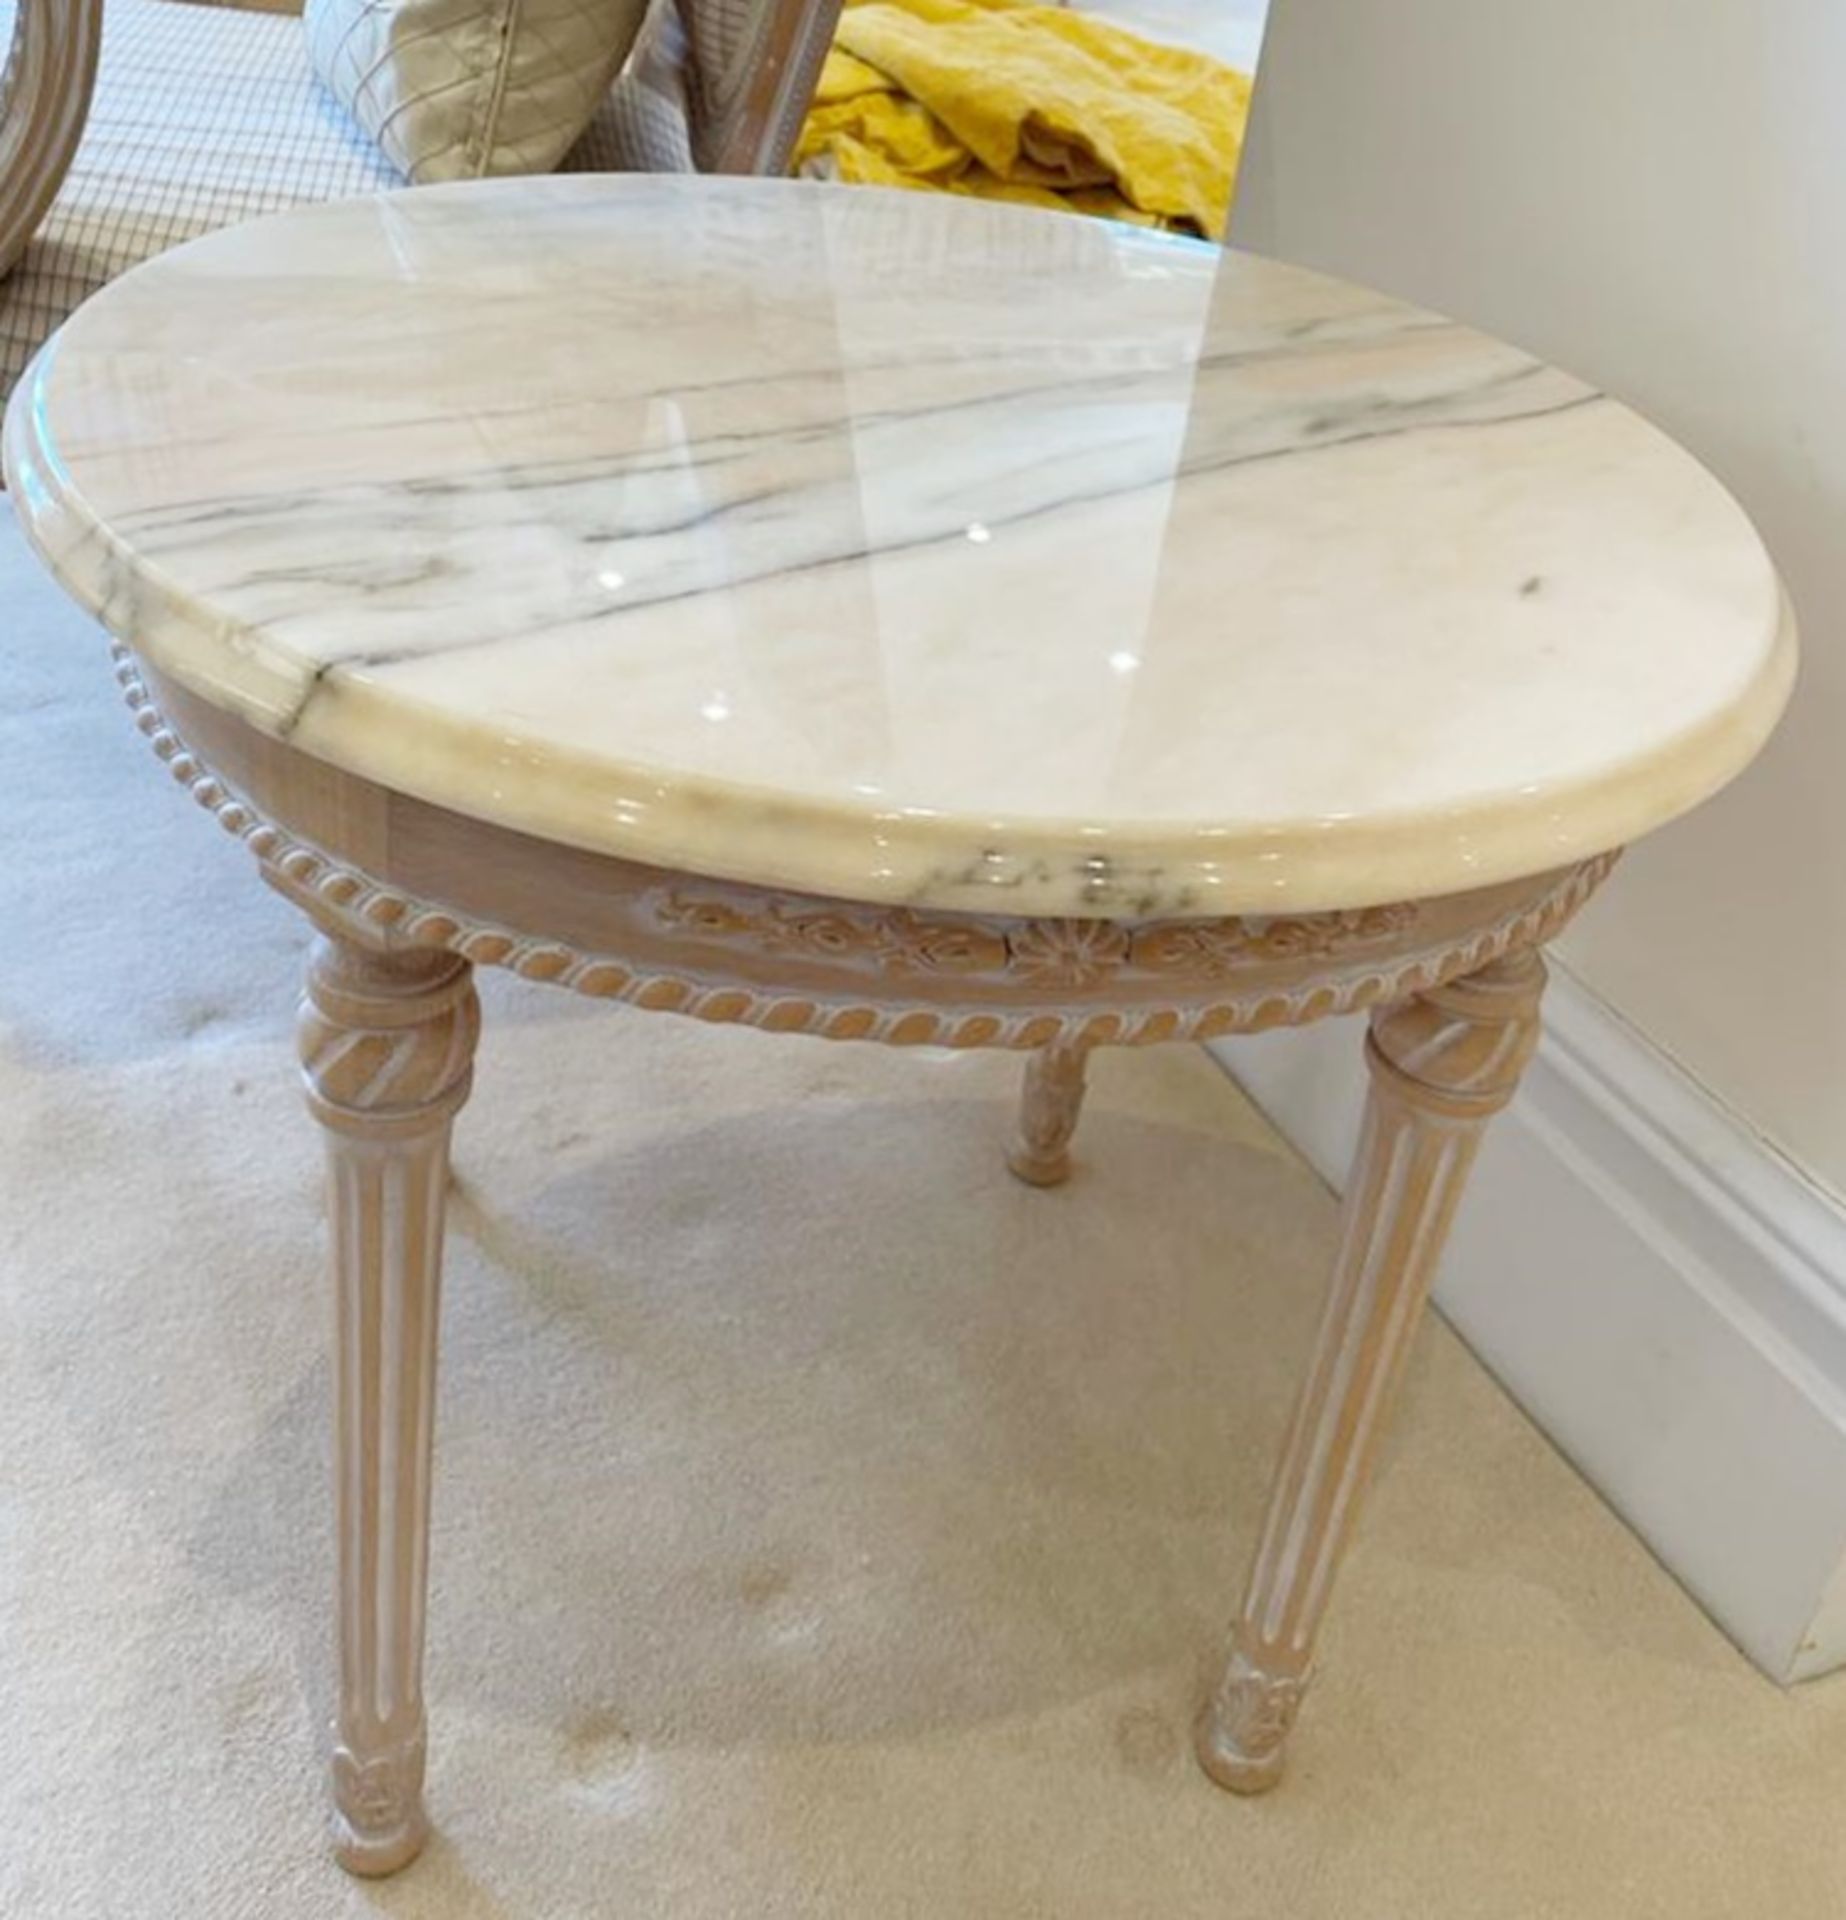 1 x French Shabby Chic Round Lamp Table With Marble Top and Ornate Carved Base - Size: H50 x W60 cms - Image 8 of 11